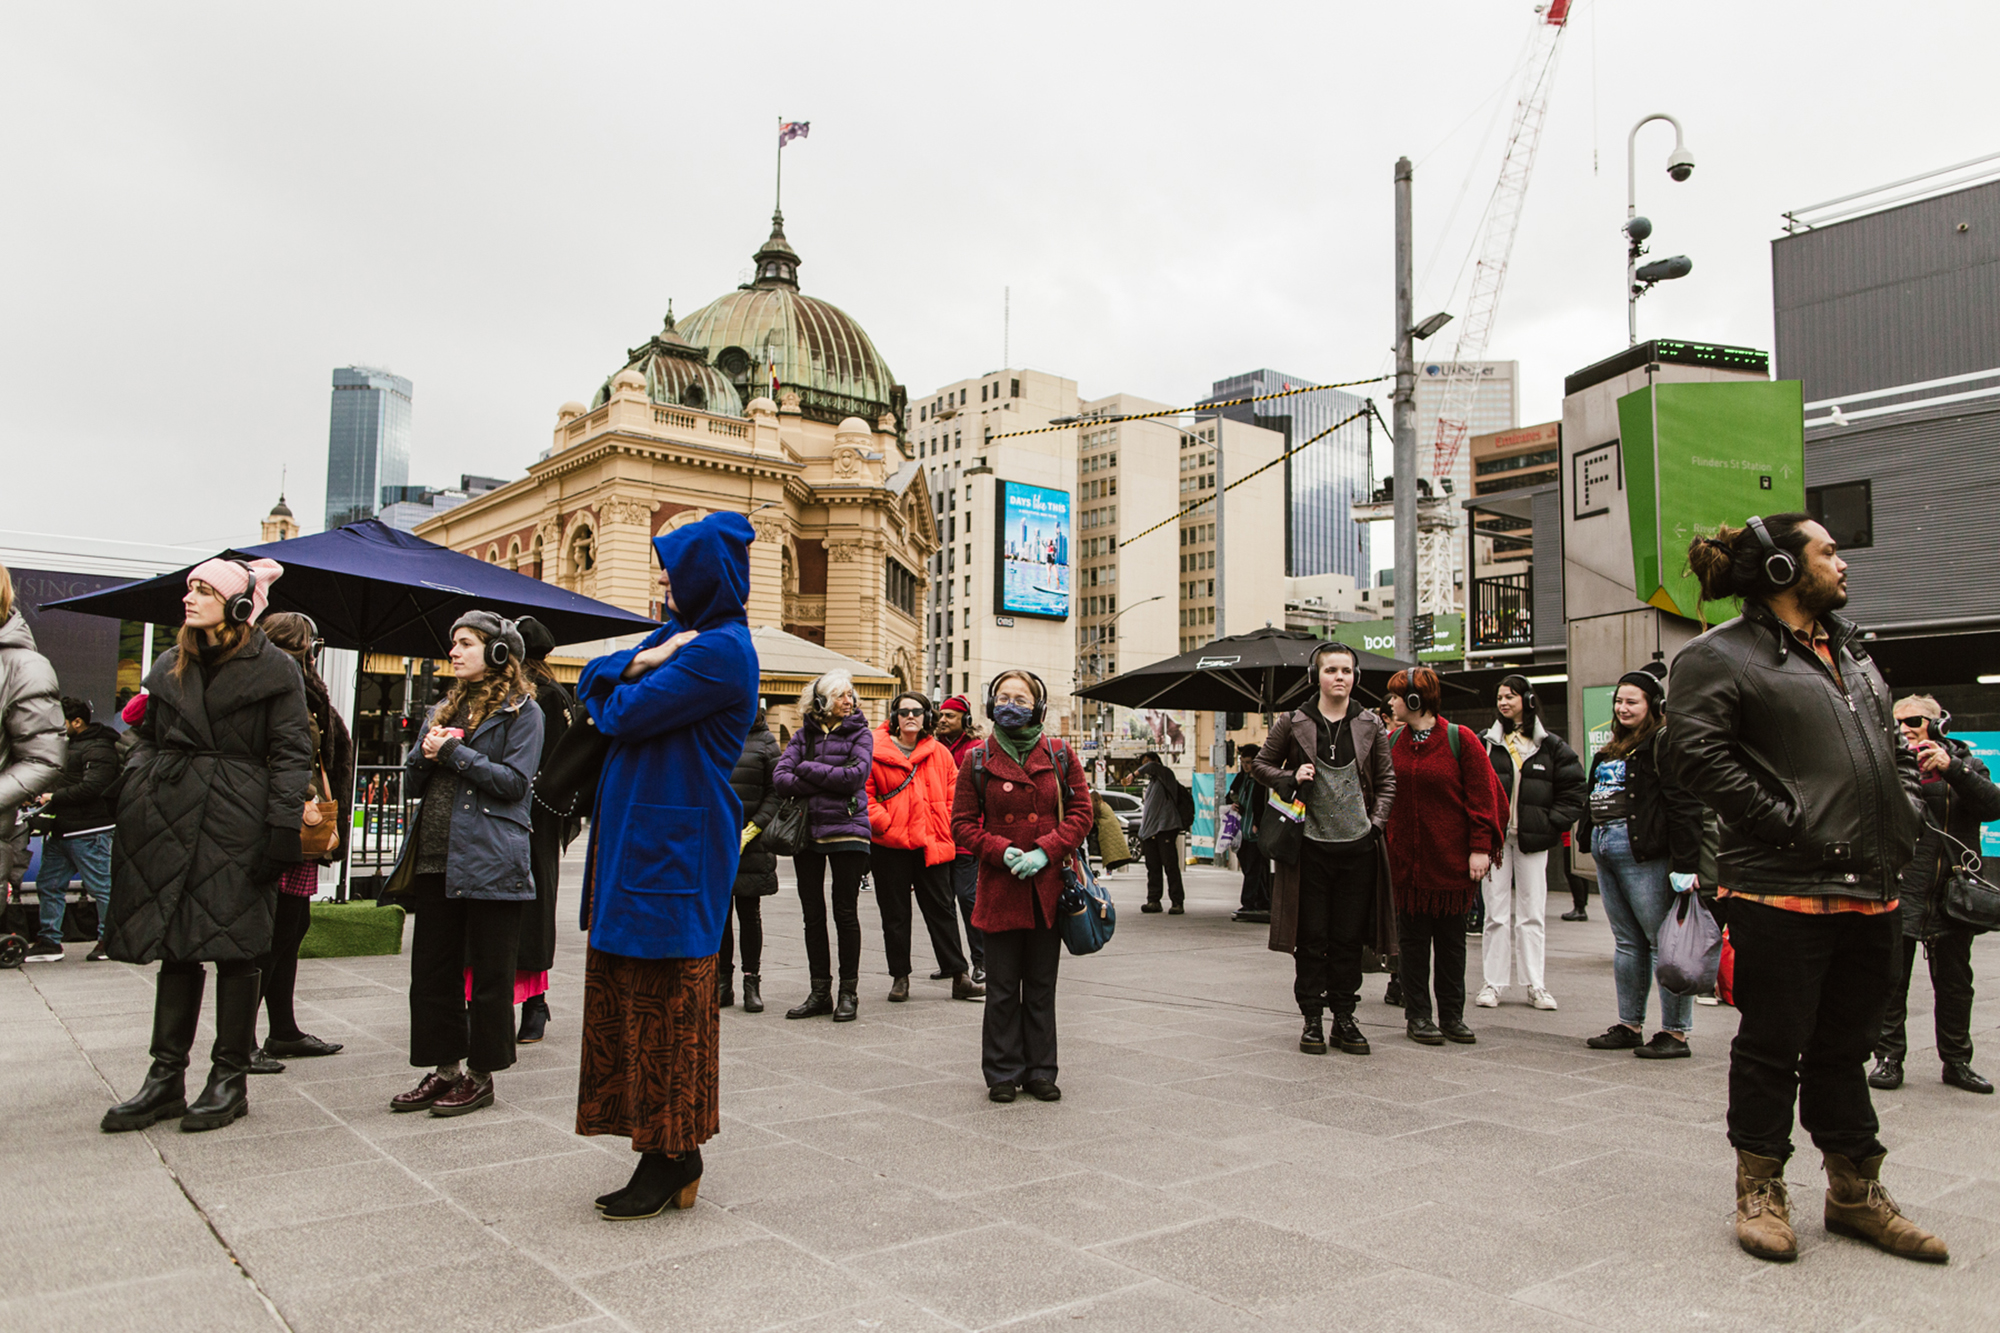 A crowd of people stand in Melbourne's Federation Square on a grey, overcast day.  They are wearing headphones.